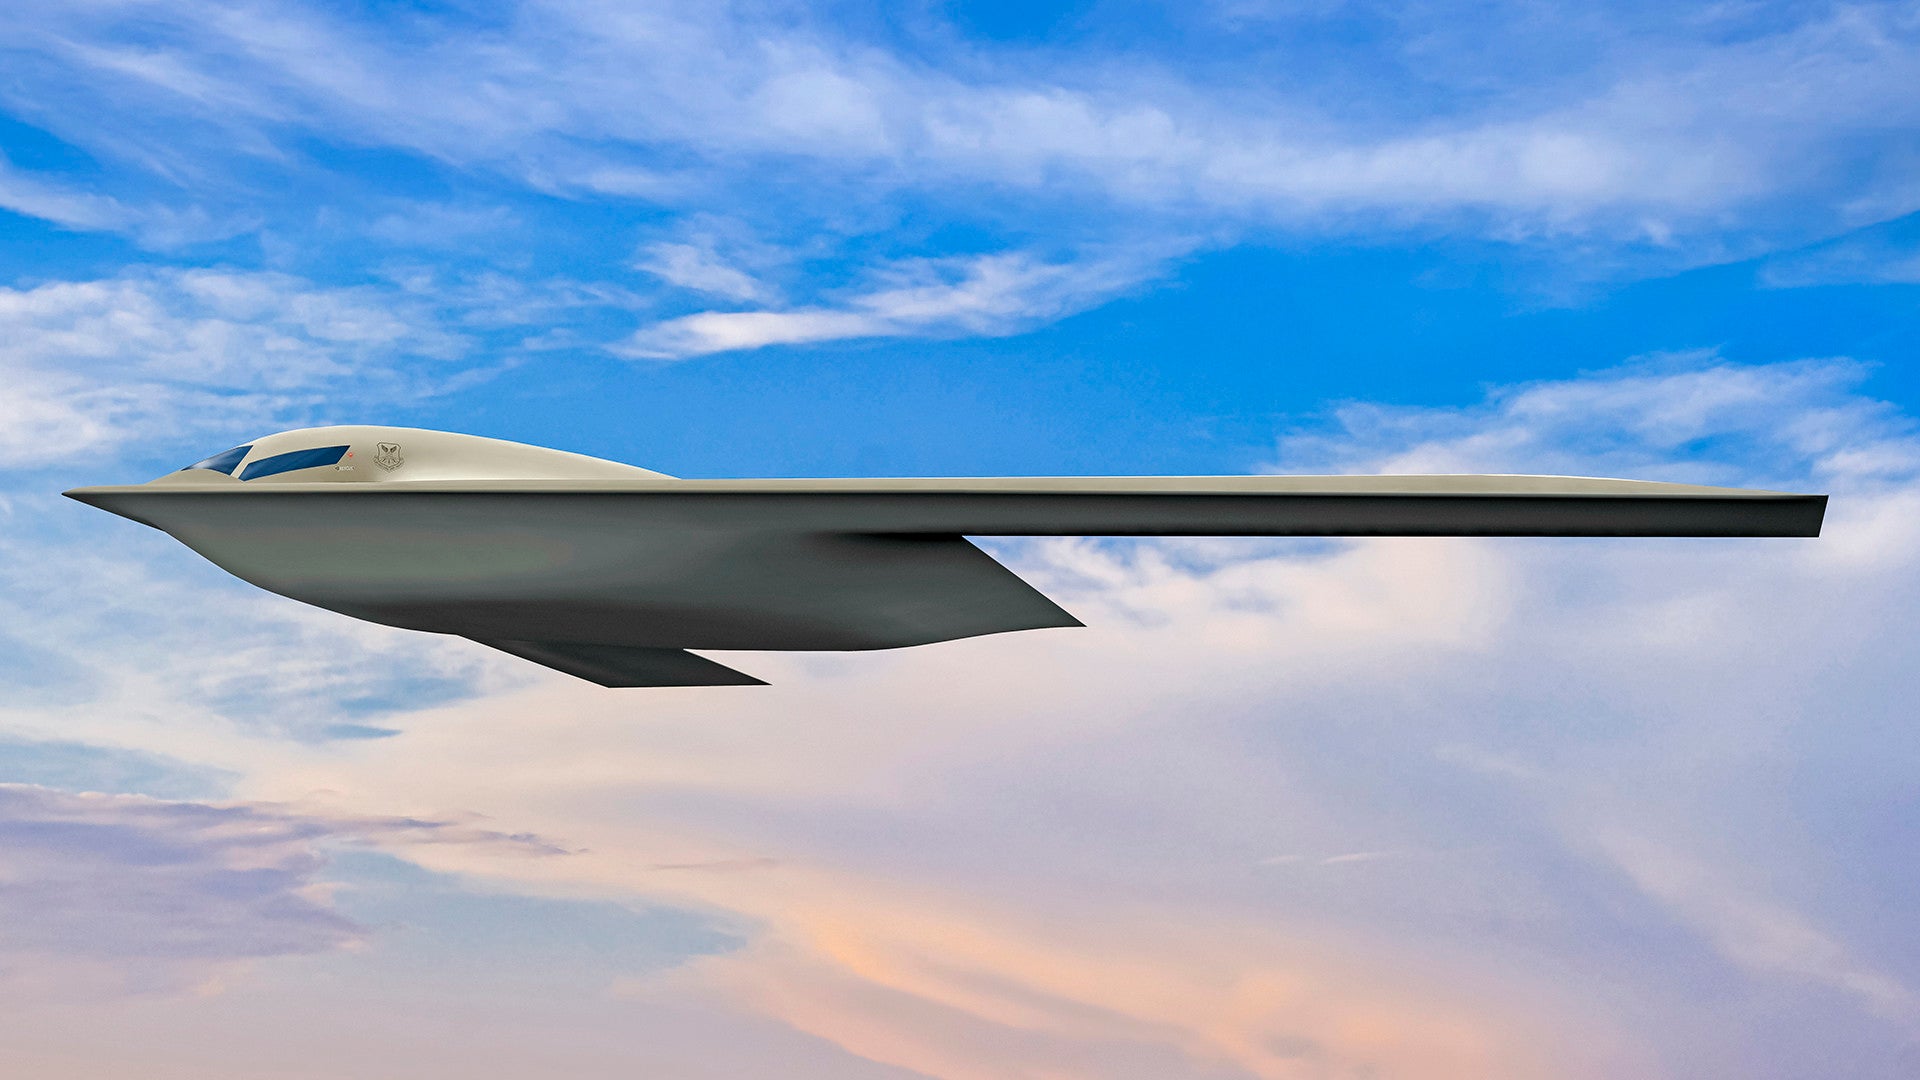 New B-21 Raider Stealth Bomber Rendering Released By The Air Force